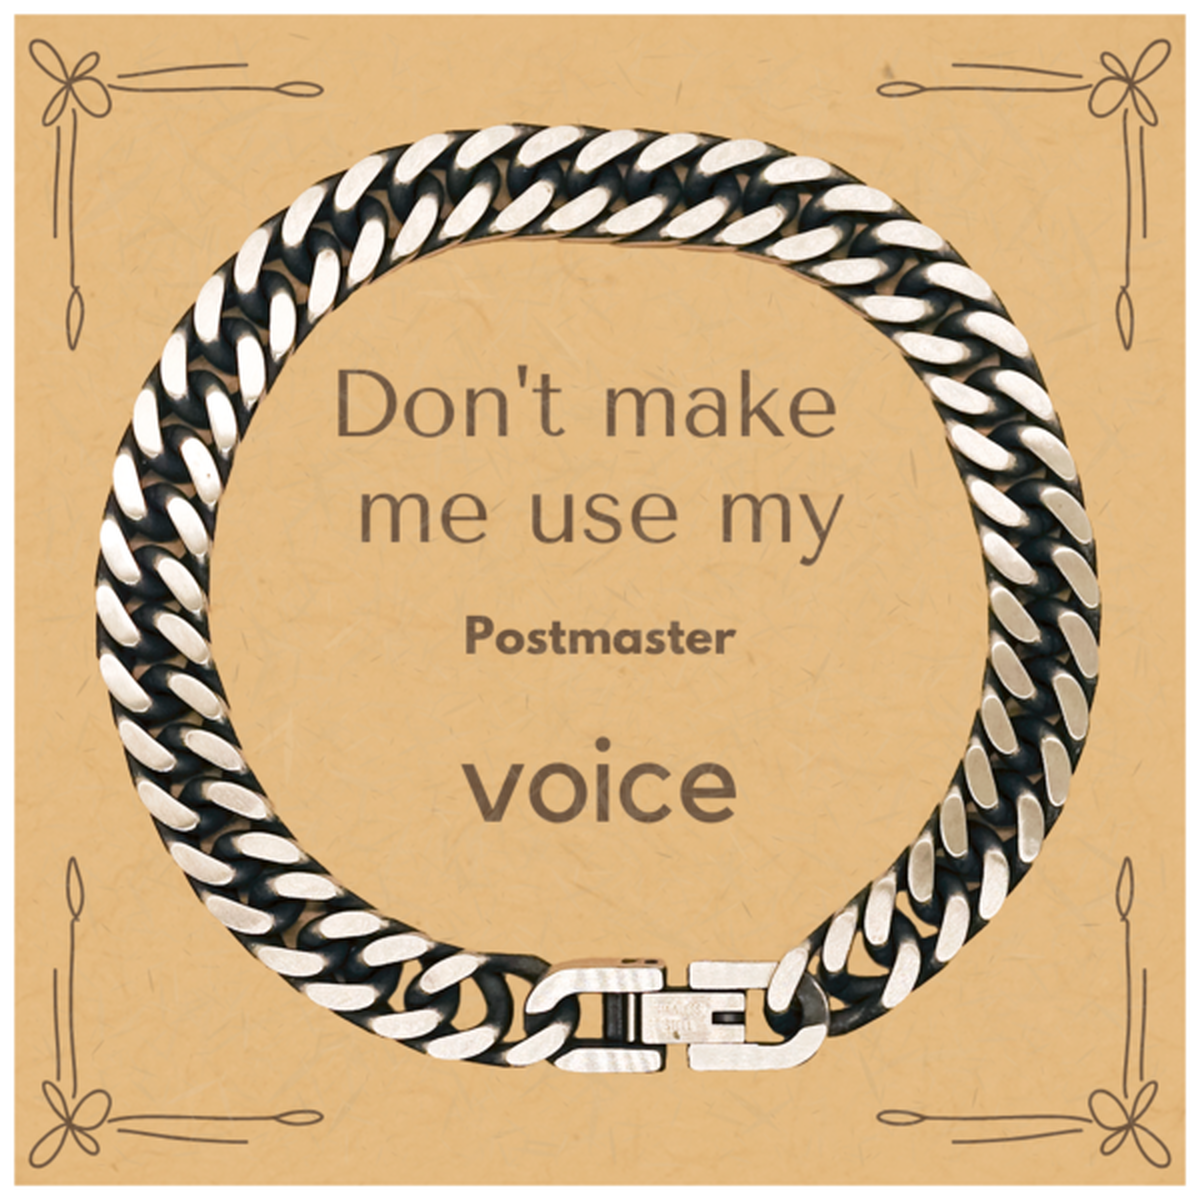 Don't make me use my Postmaster voice, Sarcasm Postmaster Card Gifts, Christmas Postmaster Cuban Link Chain Bracelet Birthday Unique Gifts For Postmaster Coworkers, Men, Women, Colleague, Friends